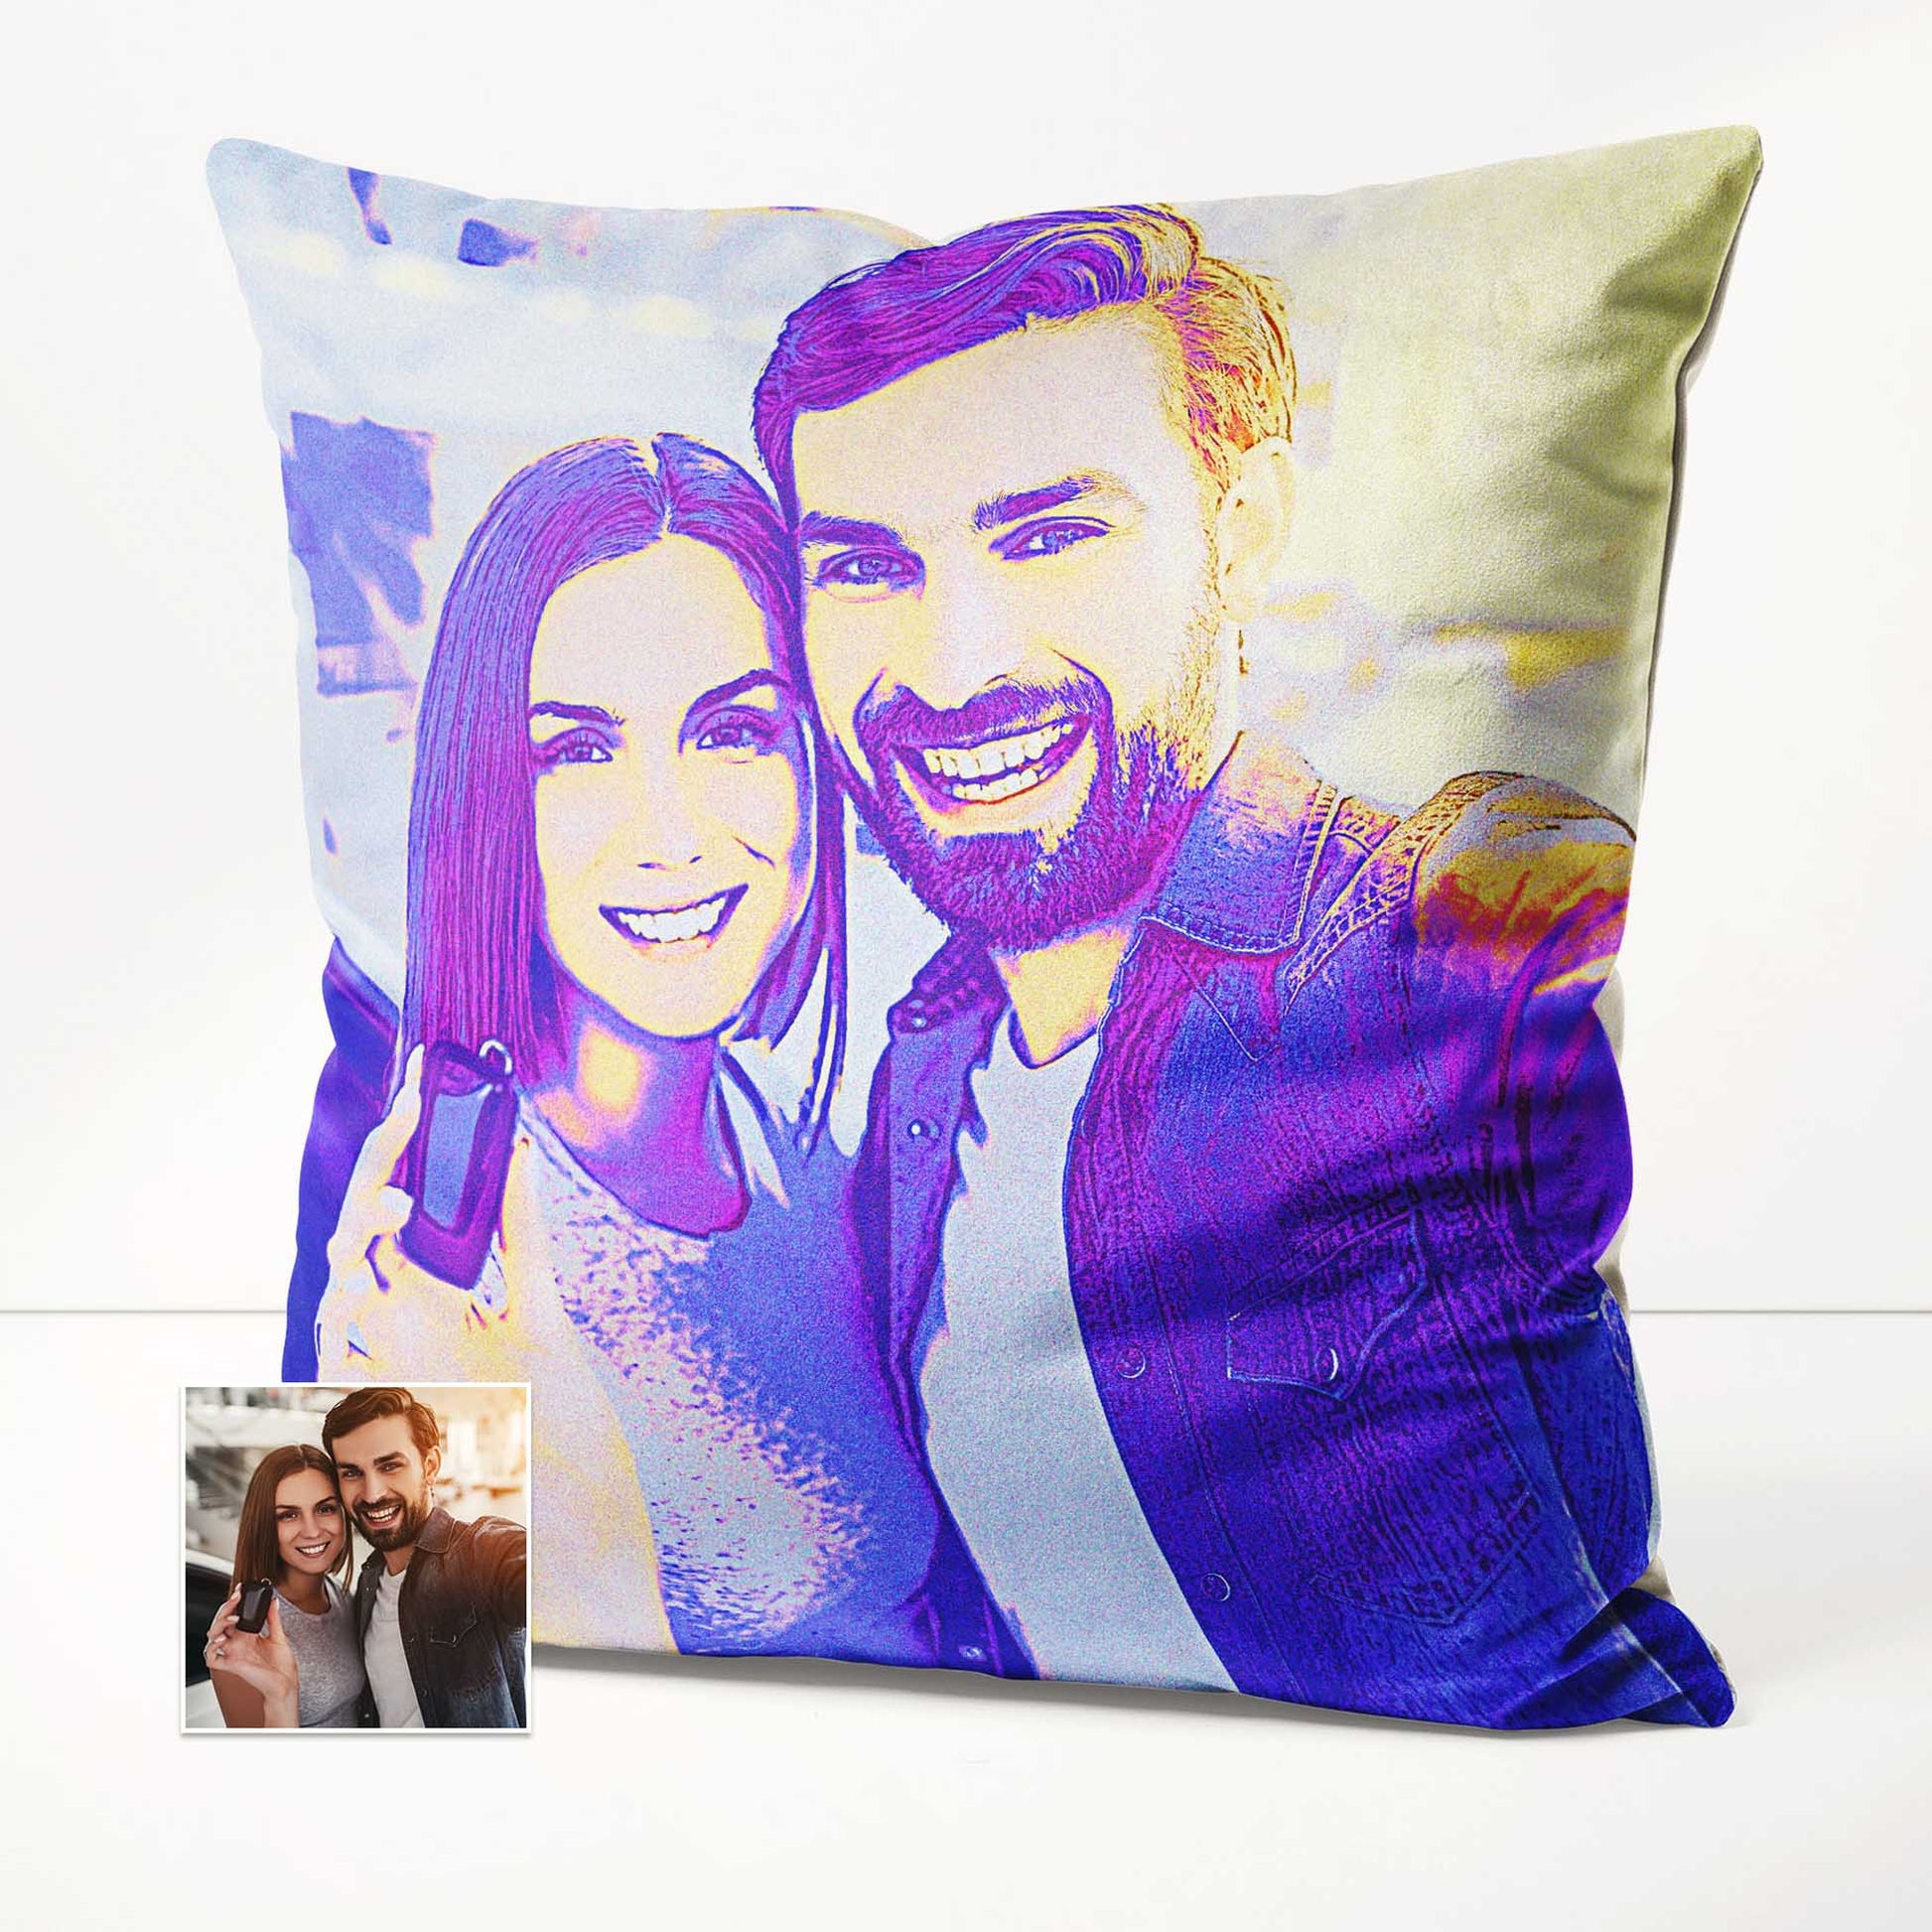 Our Personalised Blue and Purple Cushion is the epitome of luxury and comfort. Made from soft velvet, it provides a cosy and indulgent feel, perfect for snuggling up. Featuring unique furnishing with original art